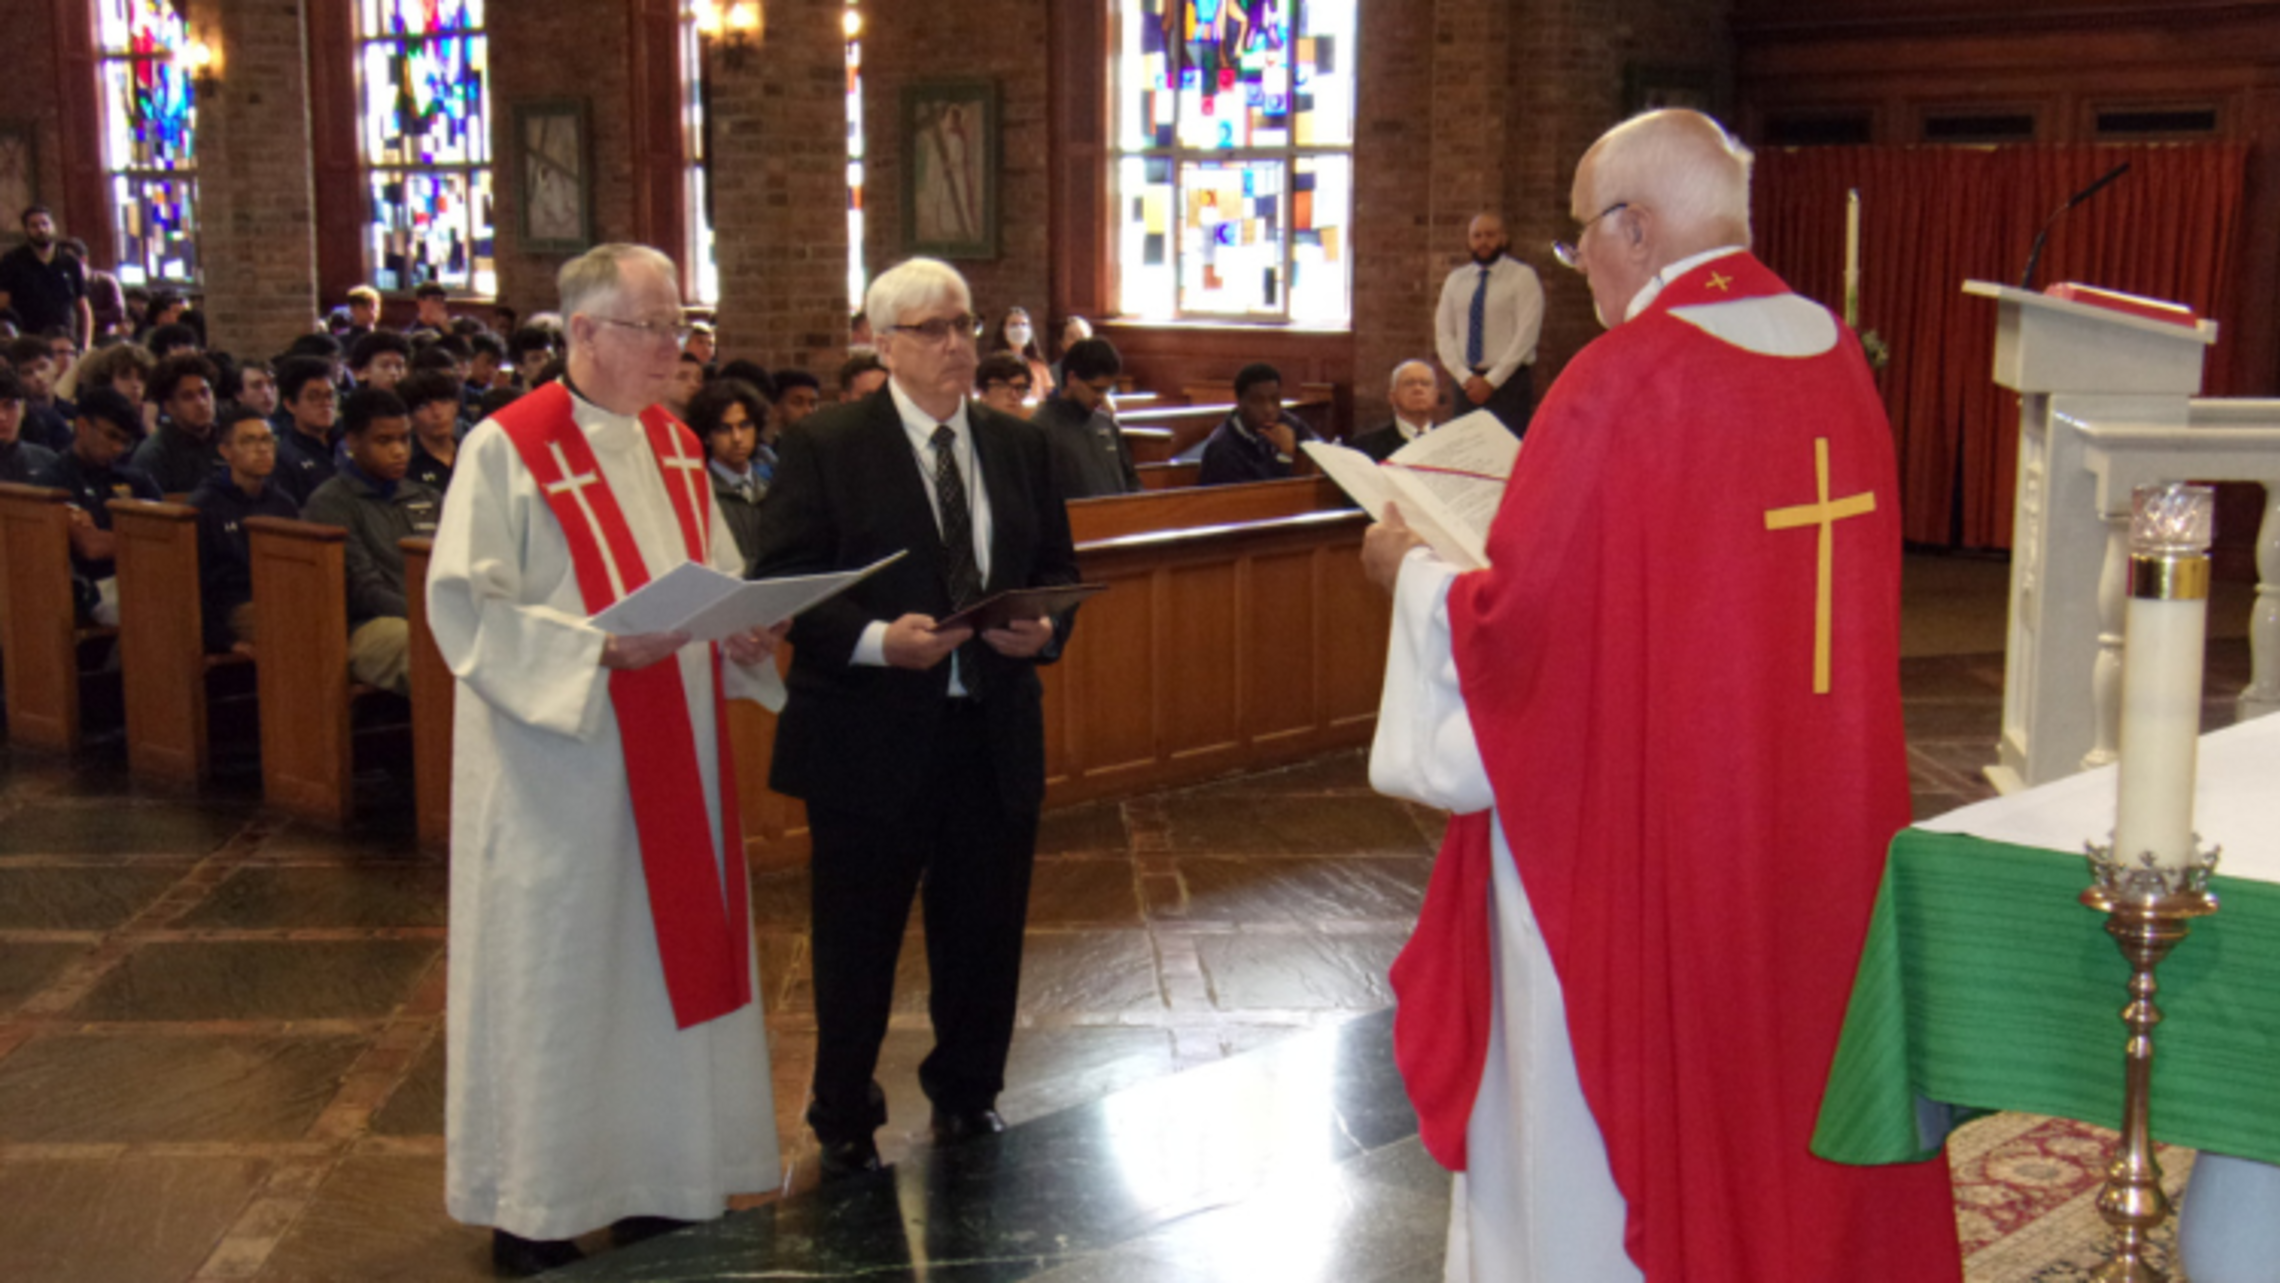 Fr. Tom and Br. Bill Renew Their Vows as Salesians